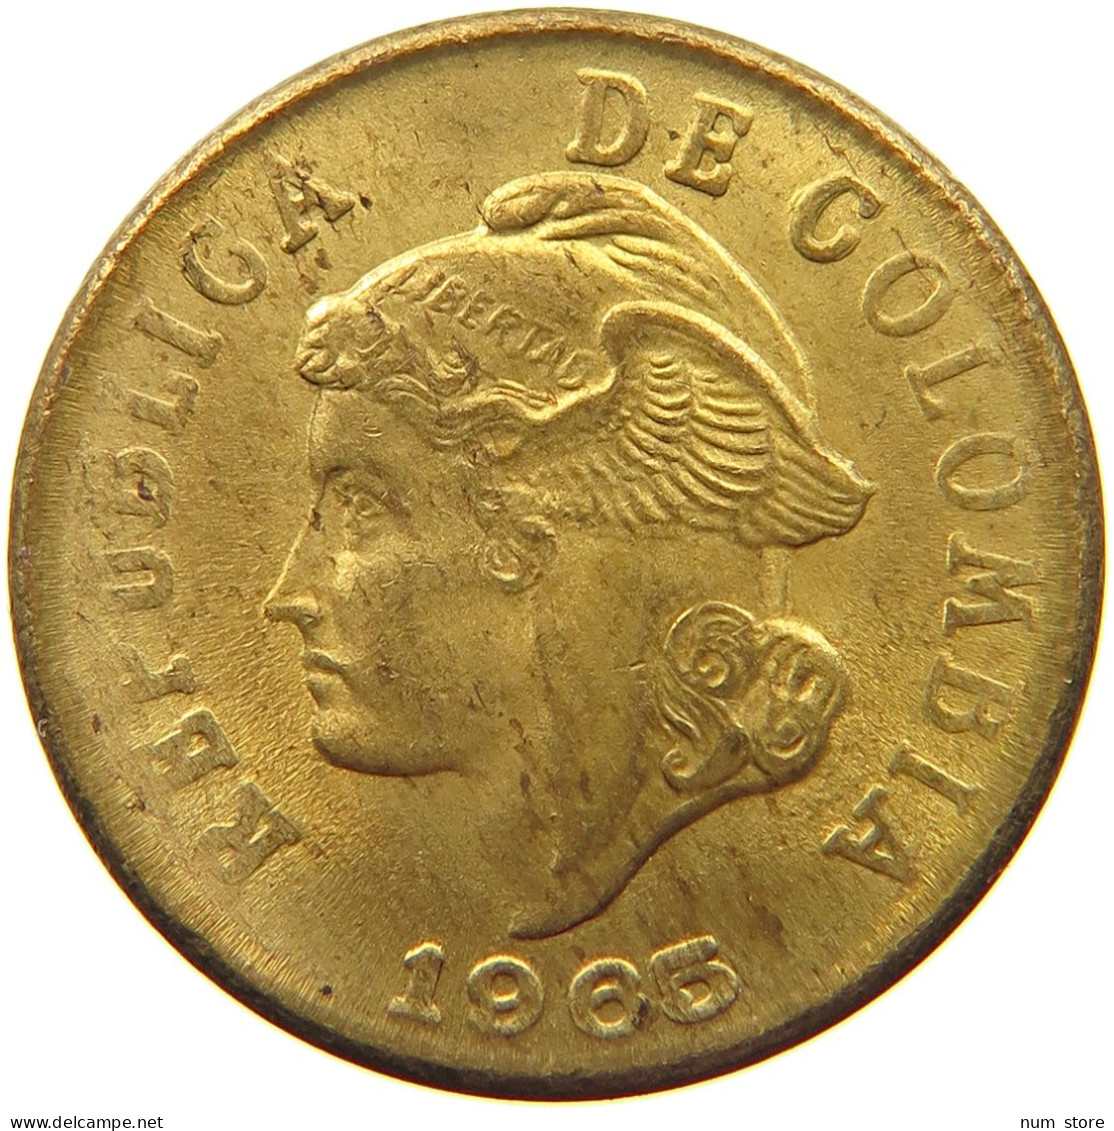 COLOMBIA 2 CENTAVOS 1965  #s041 0169 - Colombia